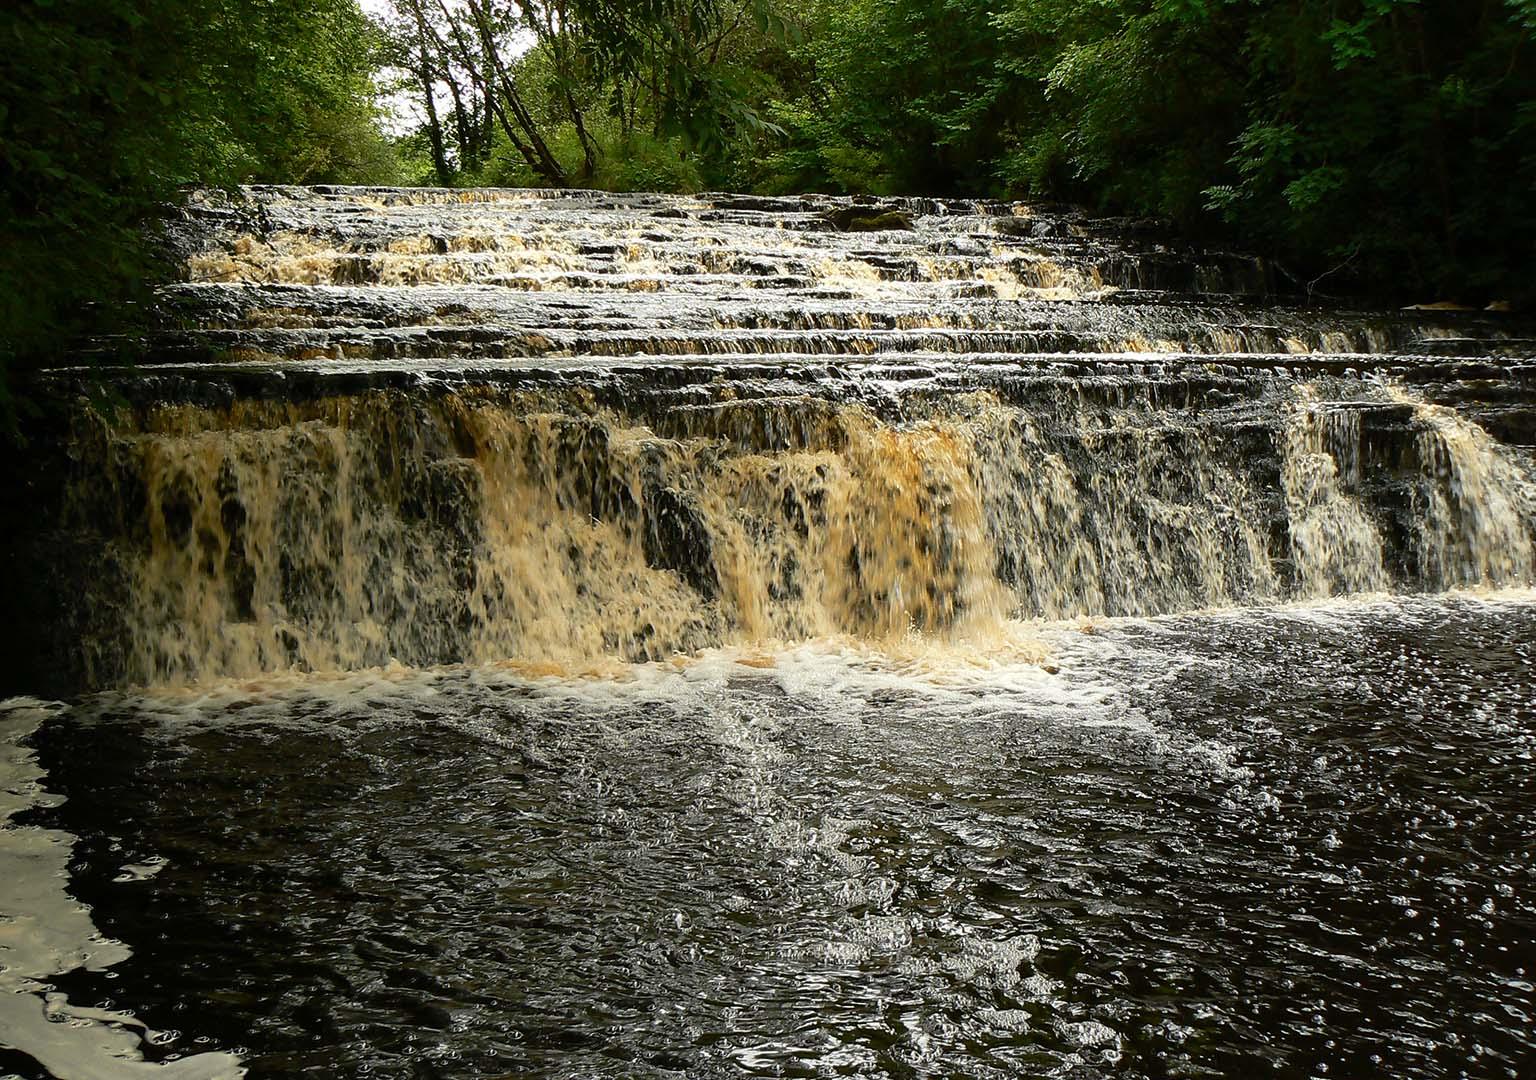 Brown coloured water flowing over a weir